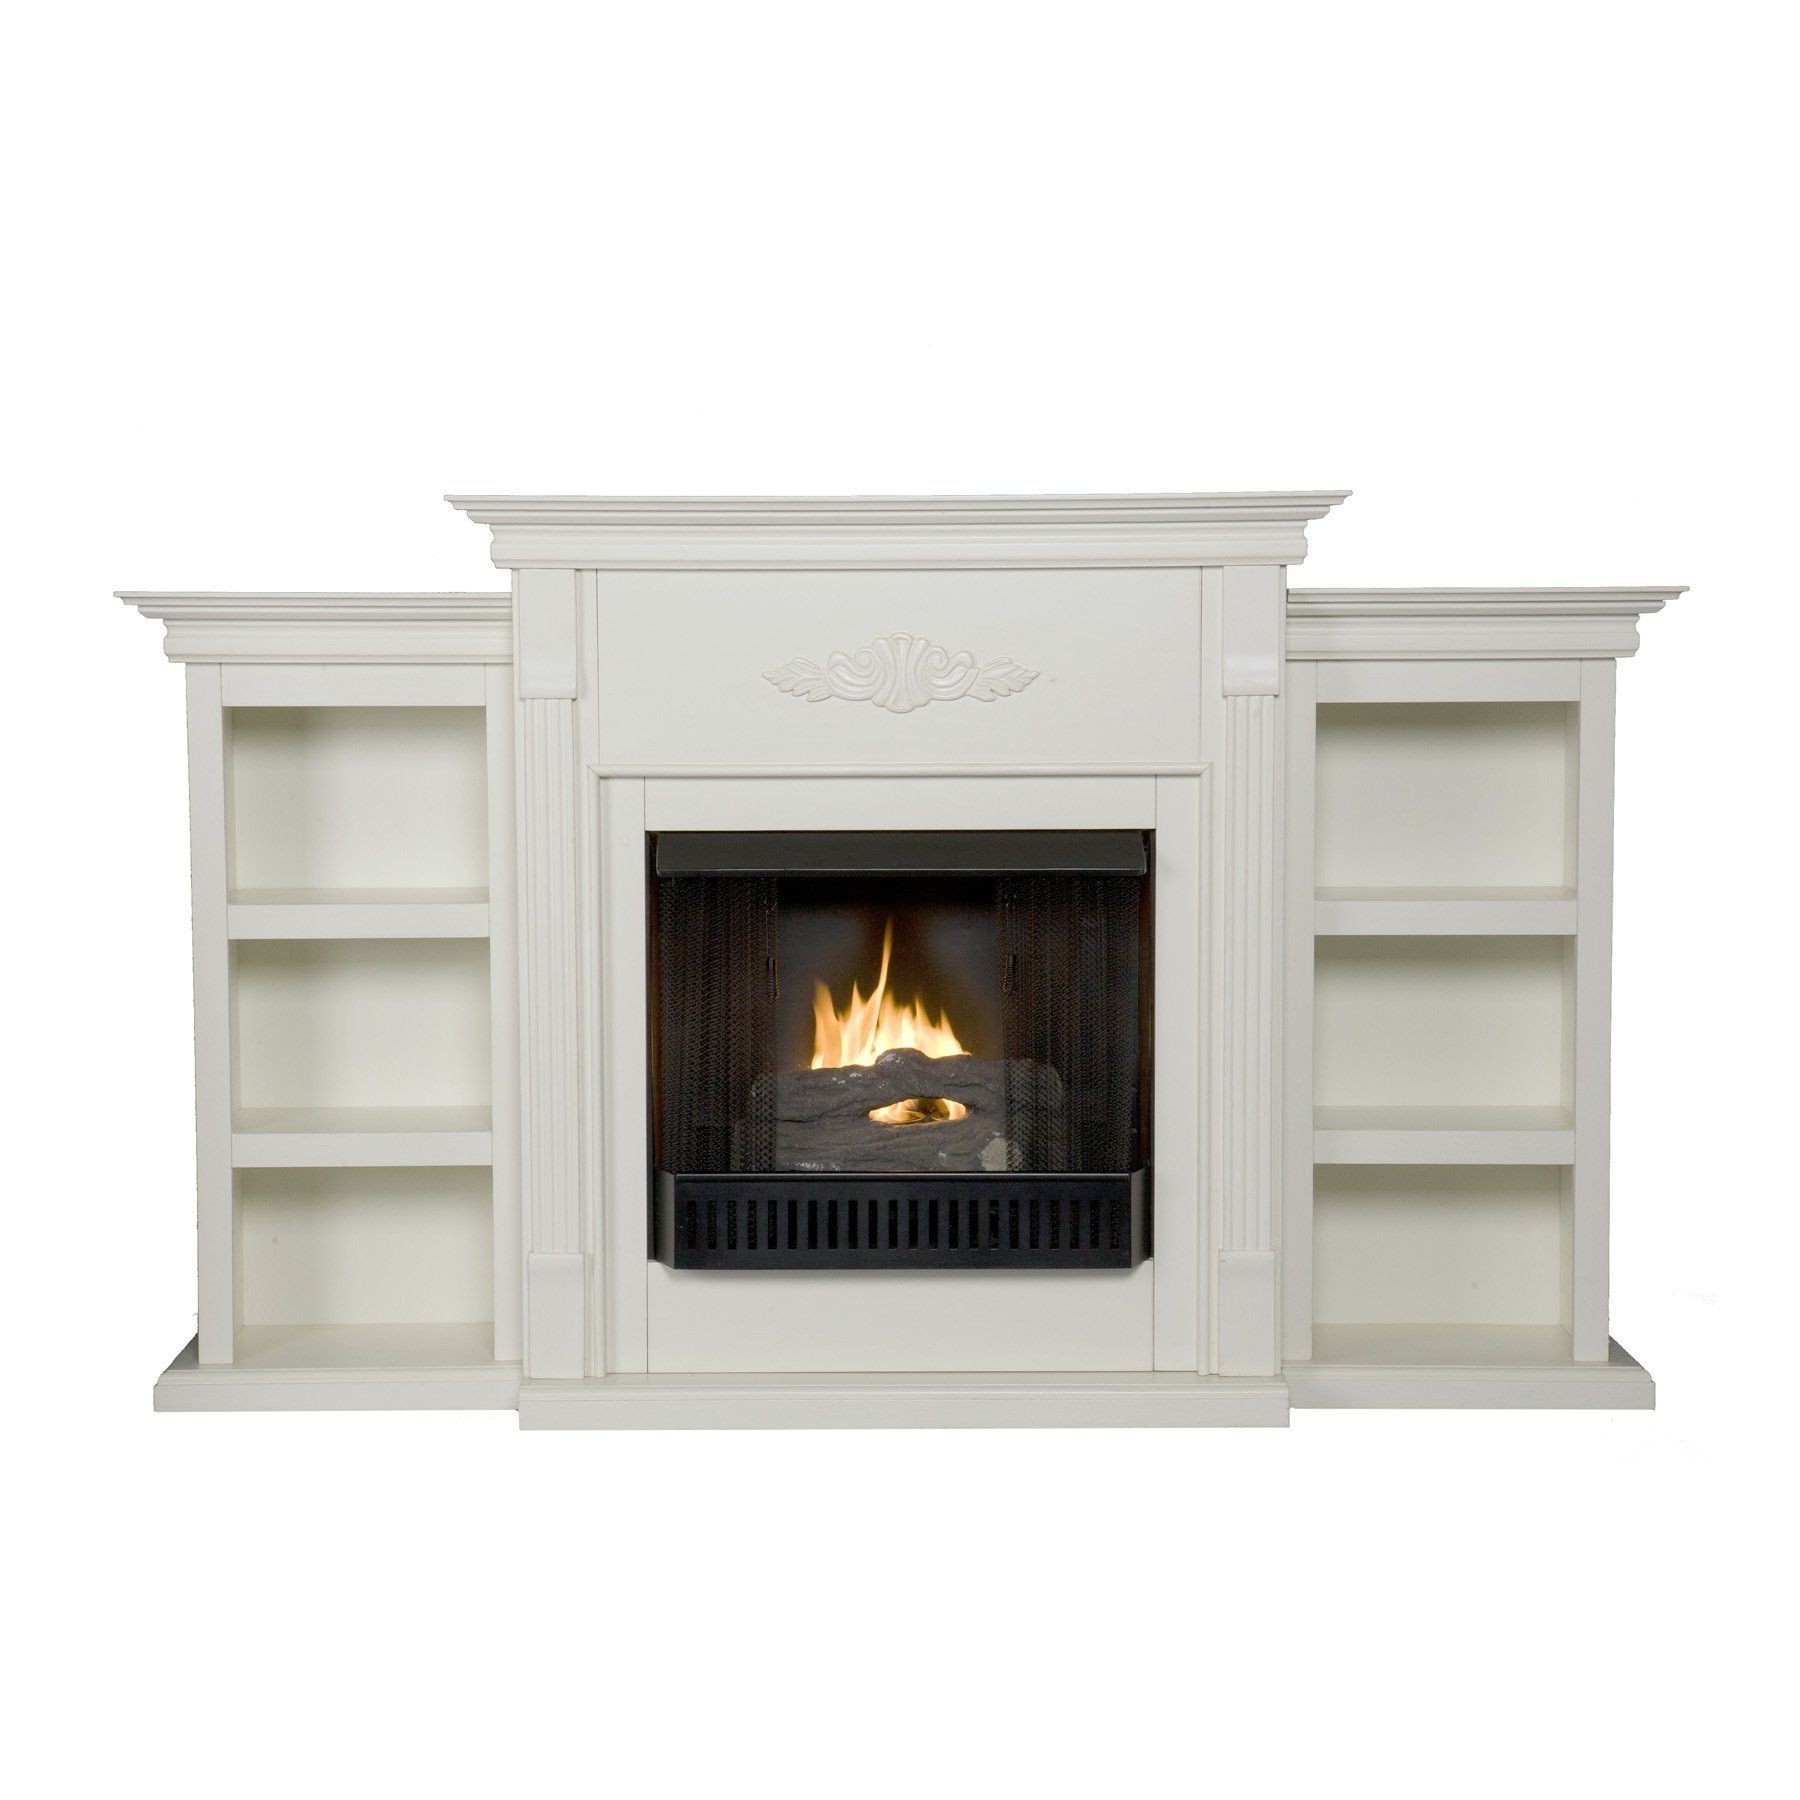 SEI Tennyson Gel Fuel Fireplace with Bookcases, Ivory